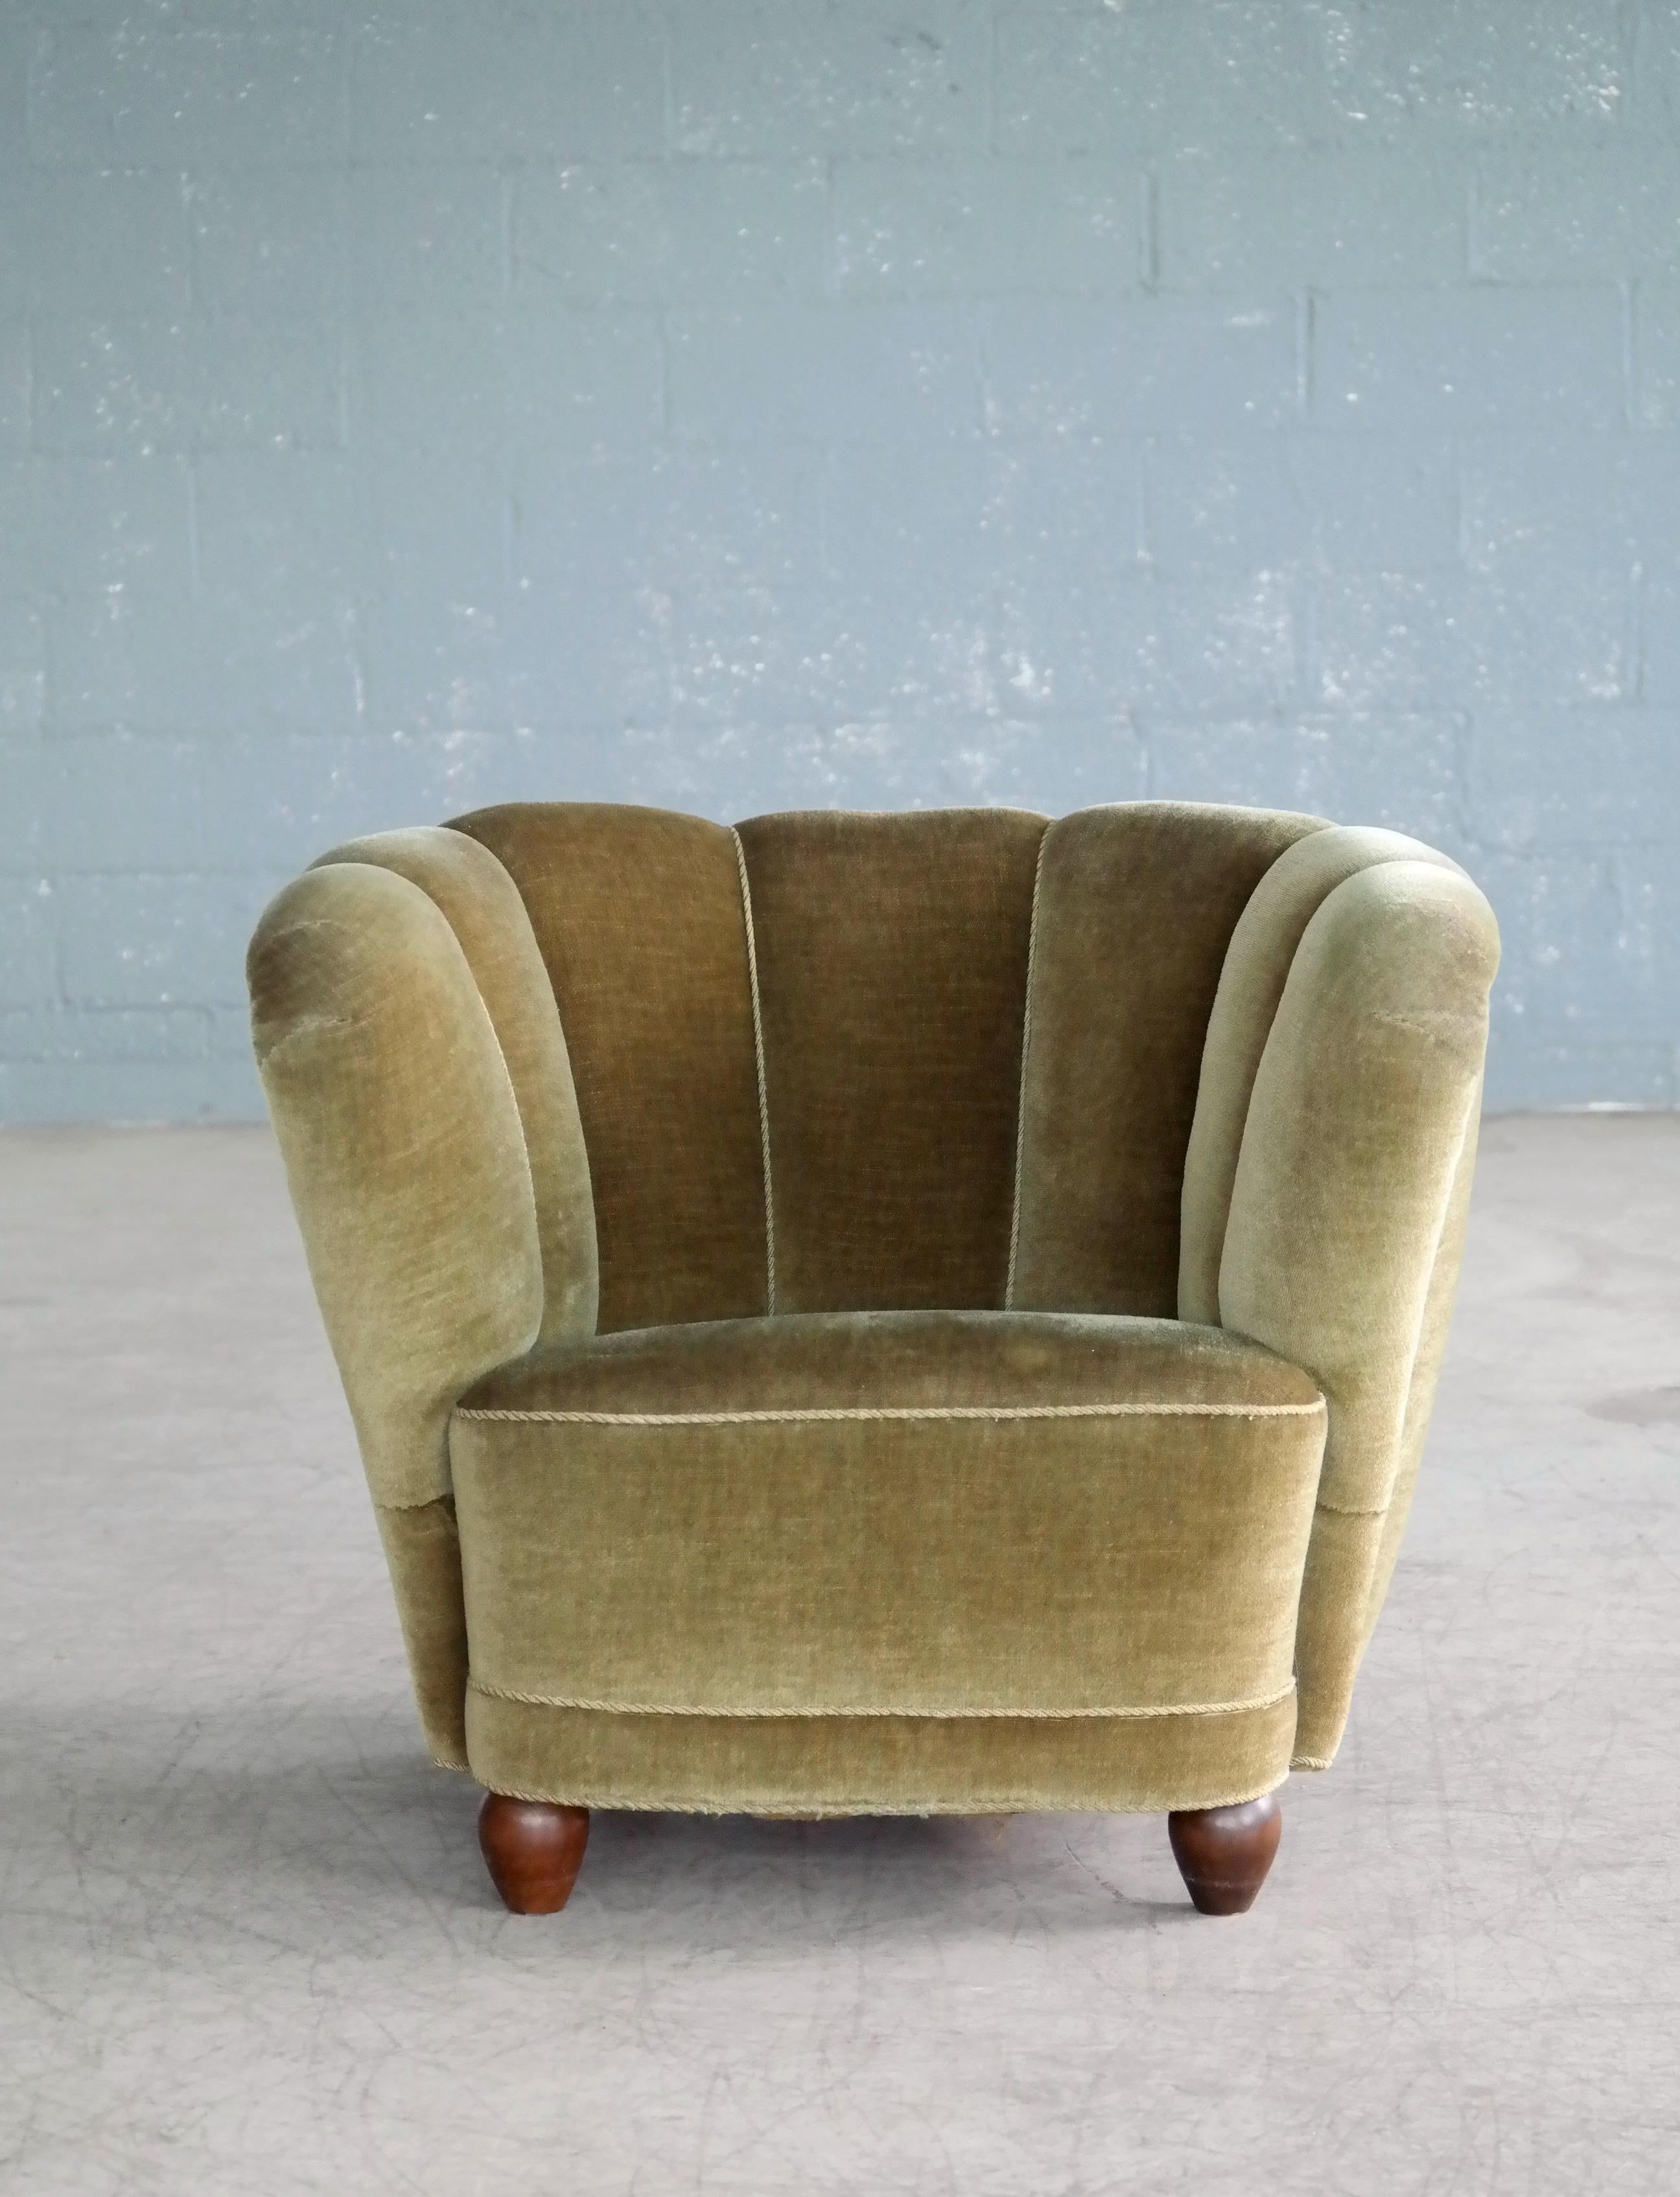 1940s Danish curved chair is an actually match the Danish curved or banana form sofas as they are also called. The sofas and chairs were very popular coming out of the 1930s and into the early 1940s and inspired by the Art Deco period. This chair